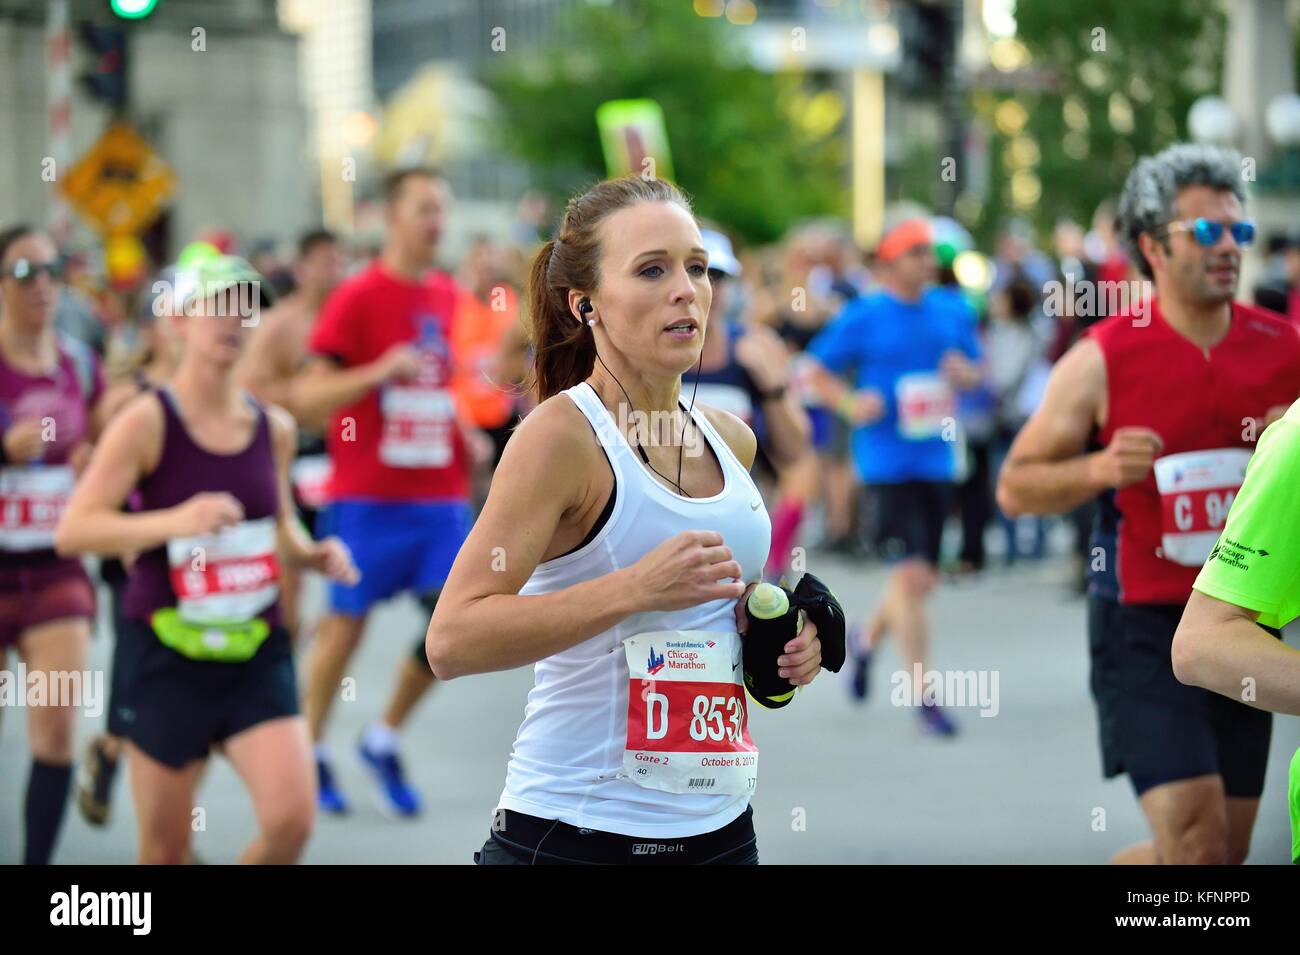 Tiffany Engleman, of Omaha, Nebraska, a face among the throng, running among the competitors during the 2017 Chicago Marathon. Stock Photo